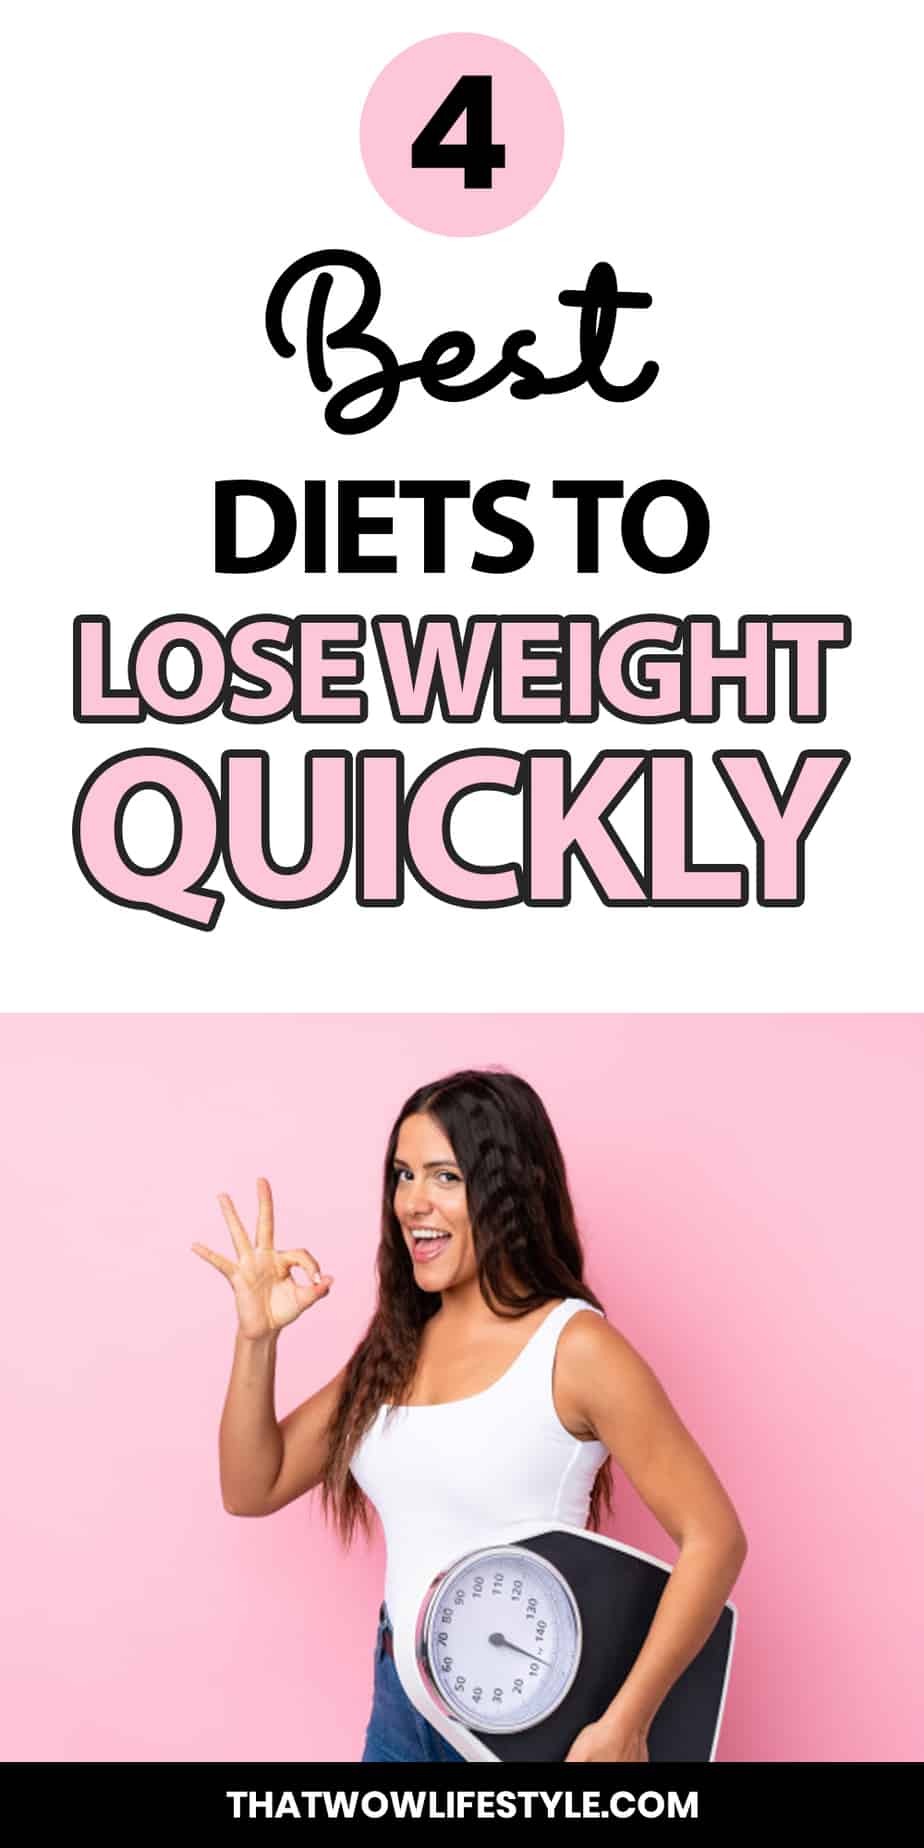 (4) Best Diets To Lose Weight Quickly – Weight Loss Tips for a Healthy Body